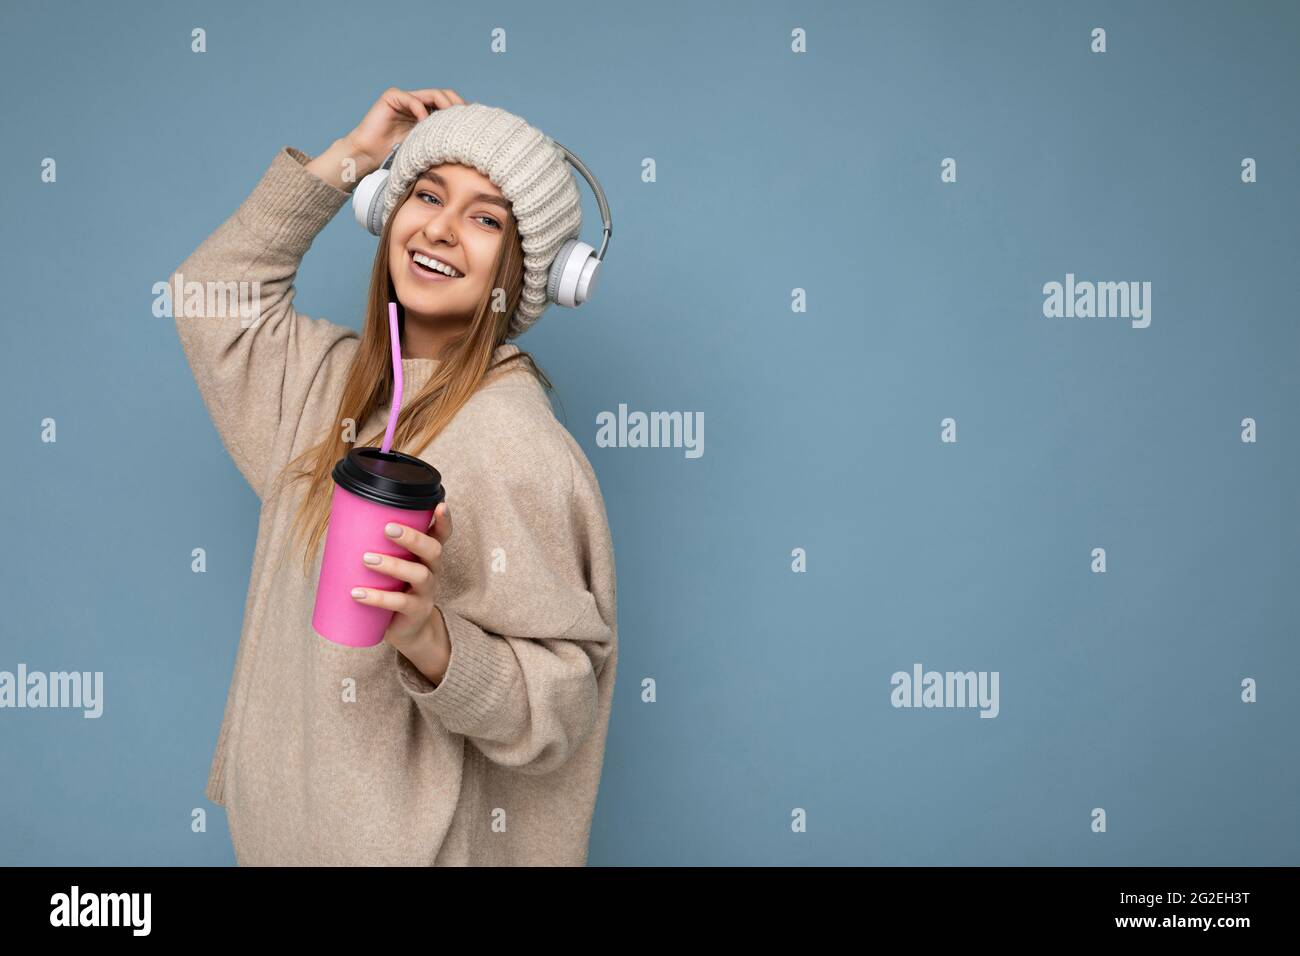 Side-profile photo of Beautiful happy smiling young blonde woman wearing beige winter sweater and hat isolated over blue background drinking beverage Stock Photo